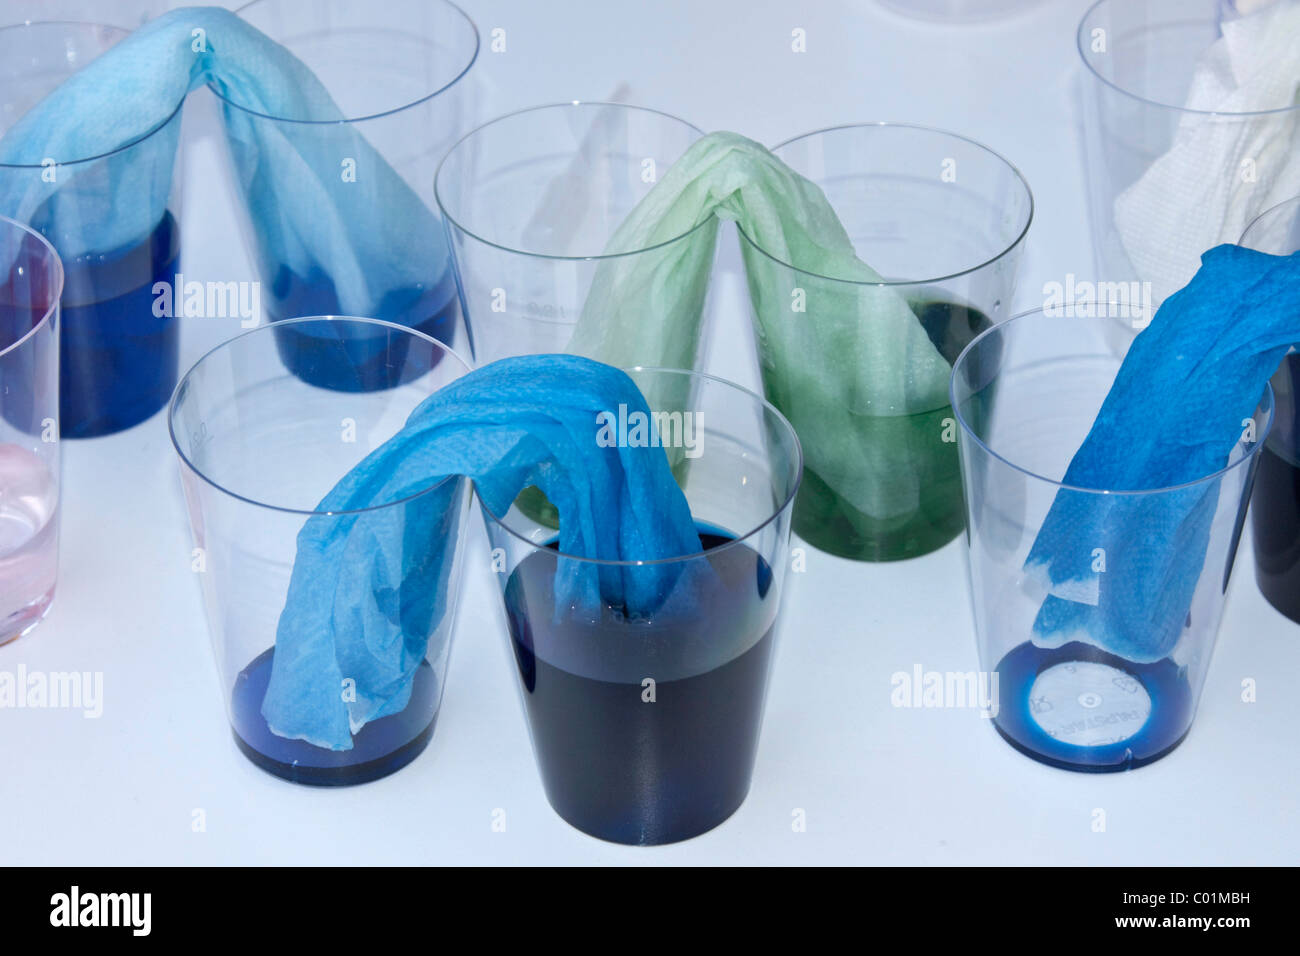 Demonstration of capillary action, capillarity, experiment with coloured water, plastic cups and paper towels Stock Photo